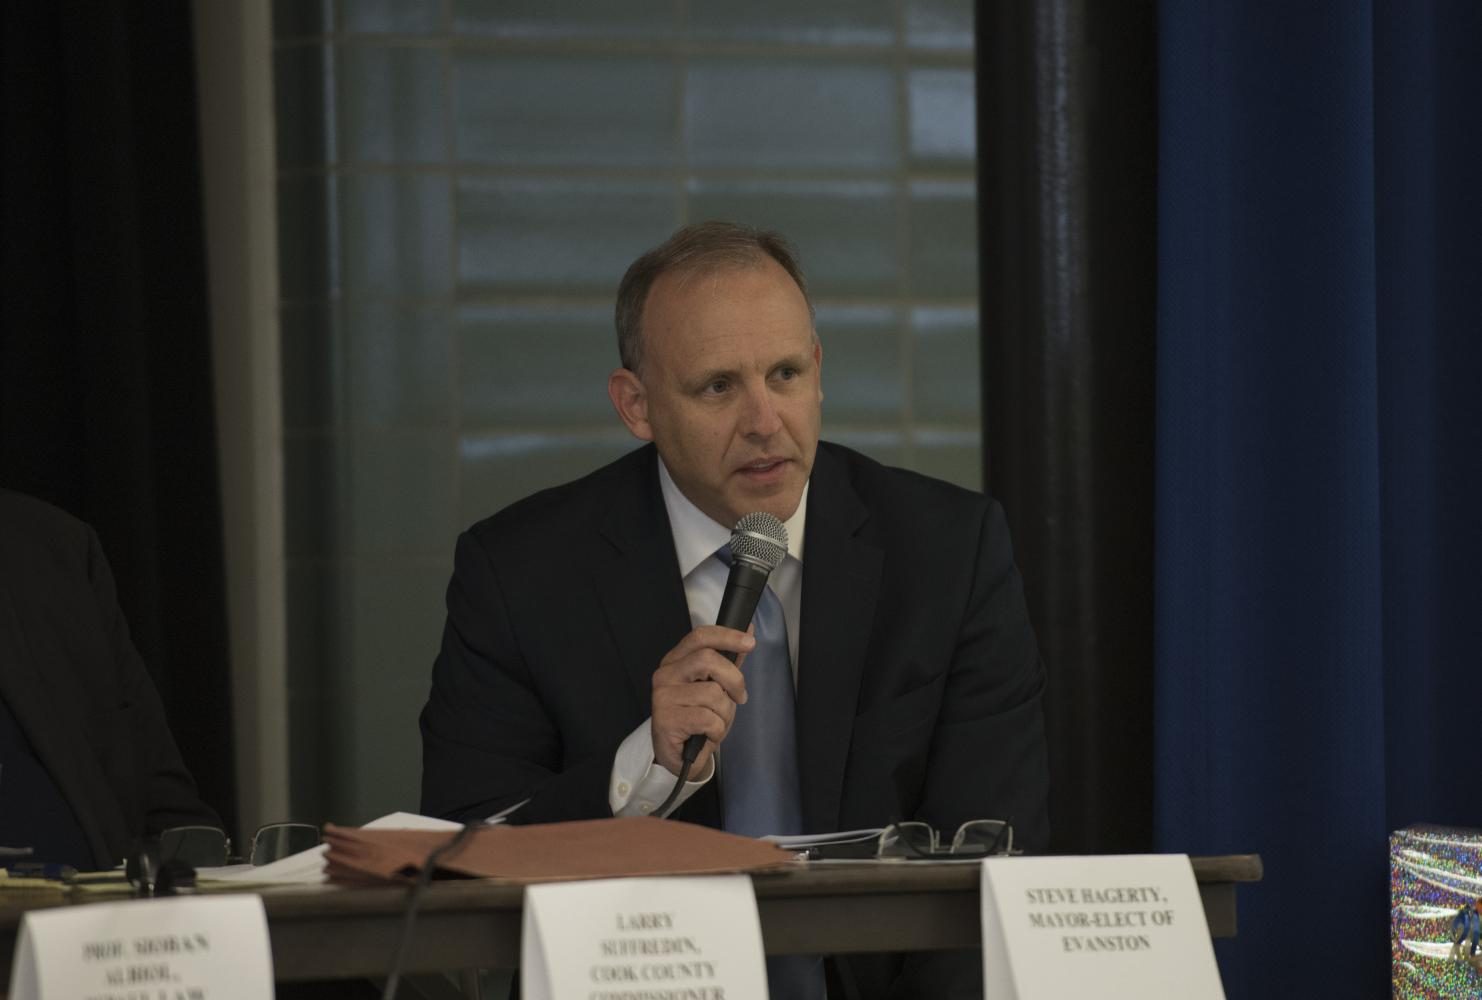 Evanston mayor Steve Hagerty speaks at a panel. Hagerty joined an effort by Chicago mayor Rahm Emanuel and 11 other mayors nationwide to post climate change information on their cities websites starting Sunday.